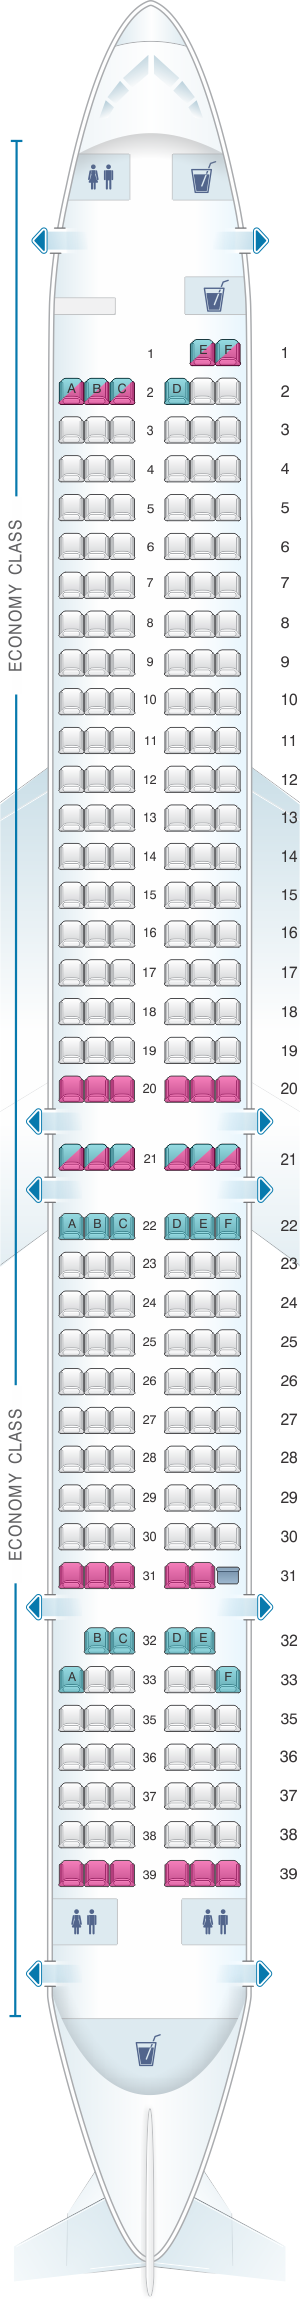 Seat map for Lion Air Boeing B737 MAX 9